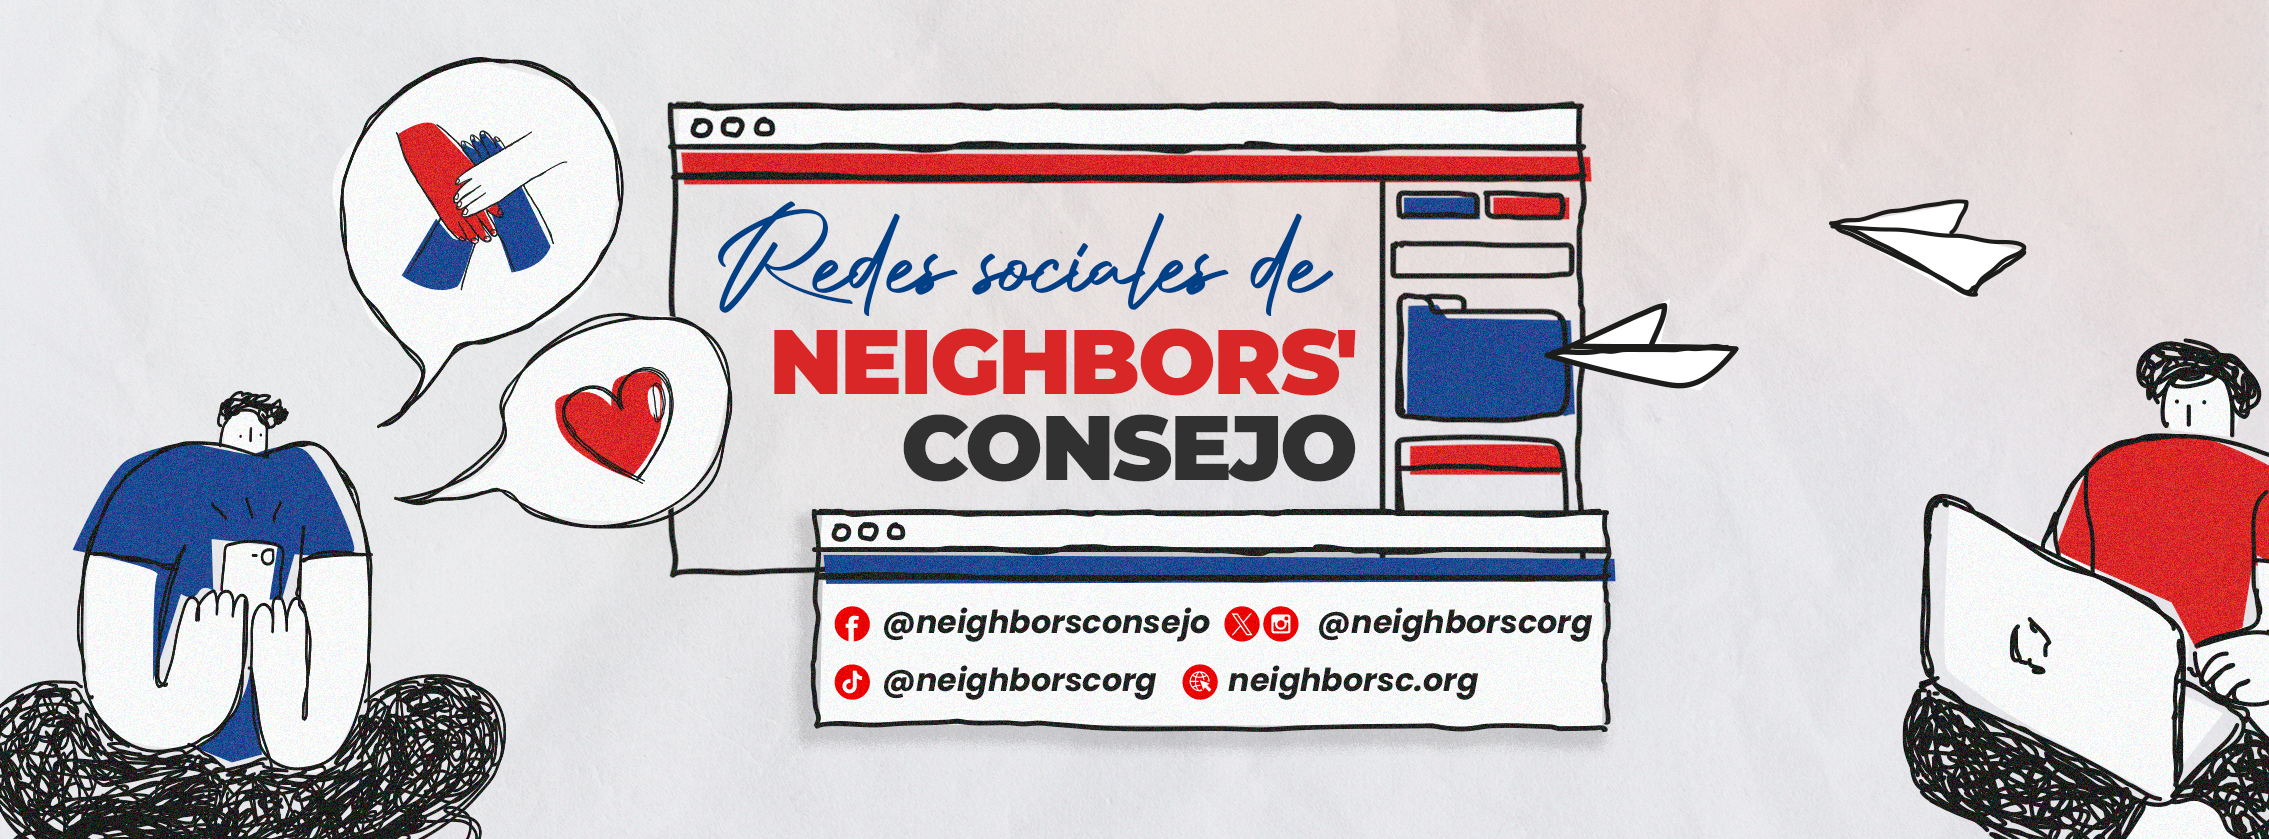 Neighbors' Consejo redes sociales